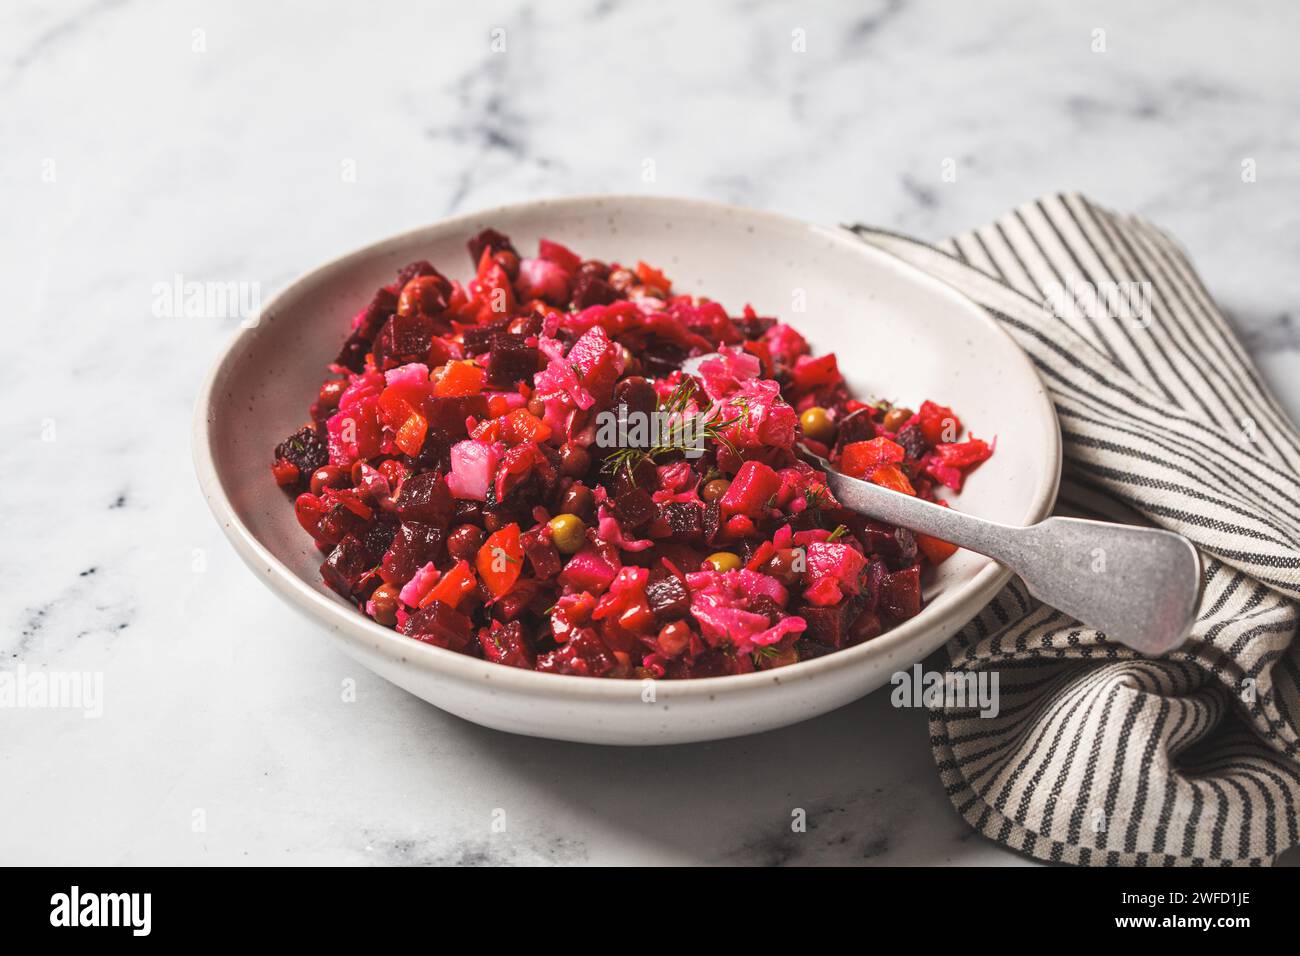 Russian beetroot vinaigrette salad with green peas, boiled vegetables and dill. Stock Photo